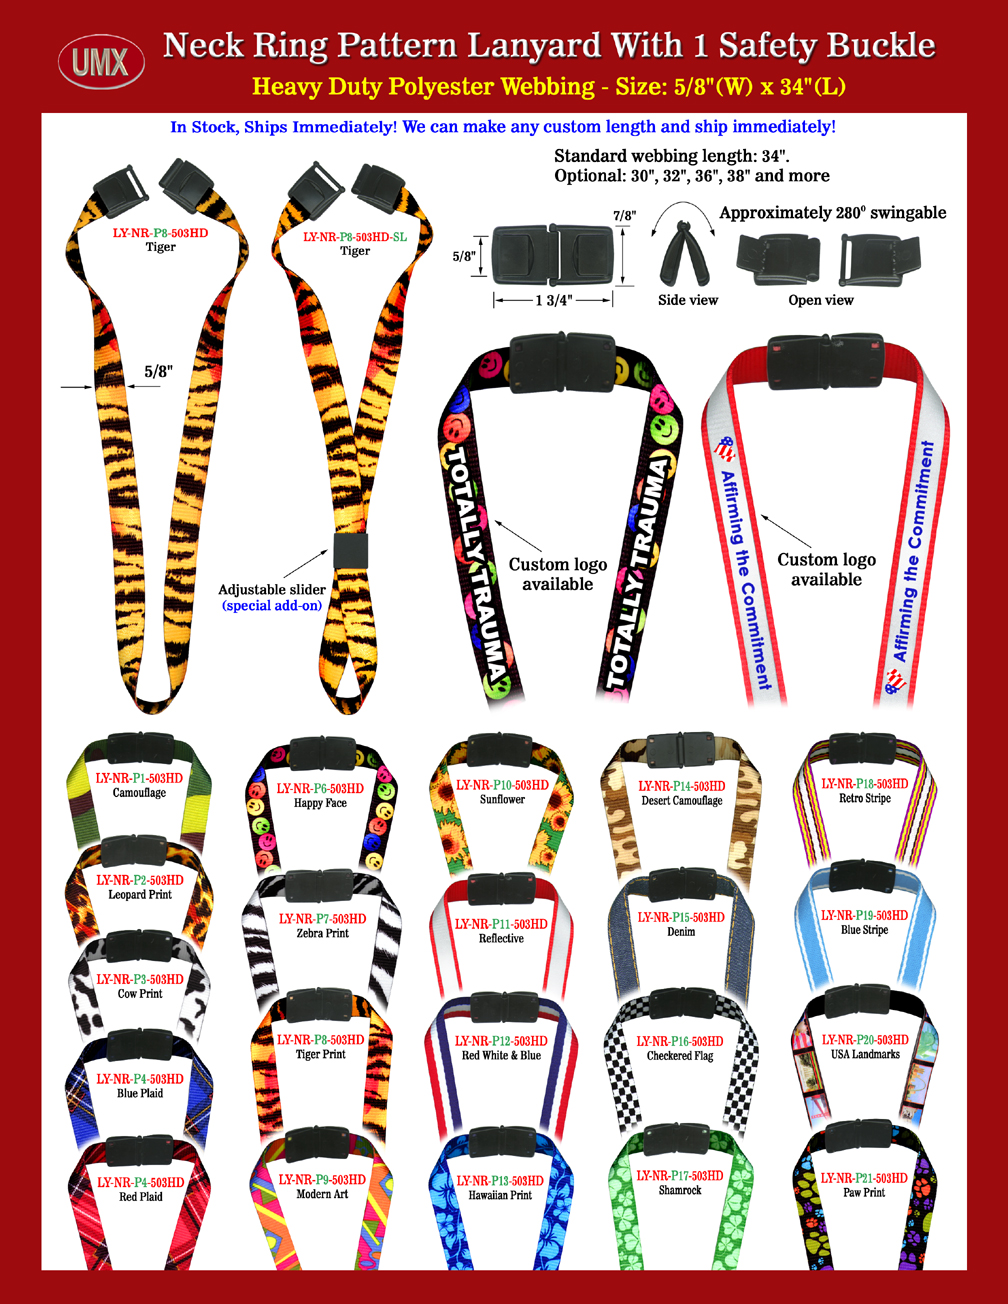 Nhe cool theme pre-printed neck straps, bands or ring lanyards will give you fresh feeling.